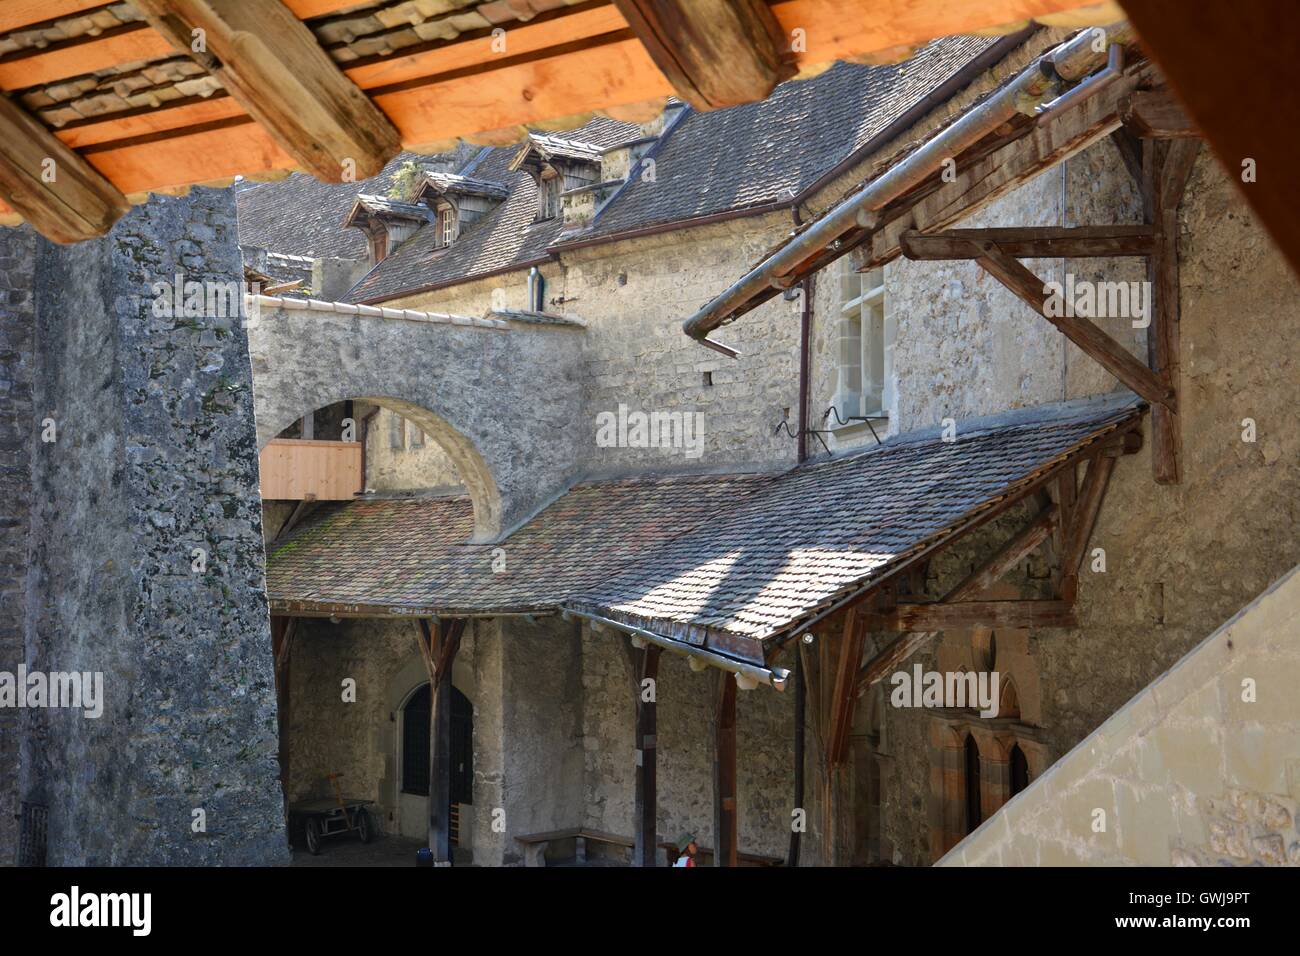 Roofs in a medieval swiss castle Stock Photo